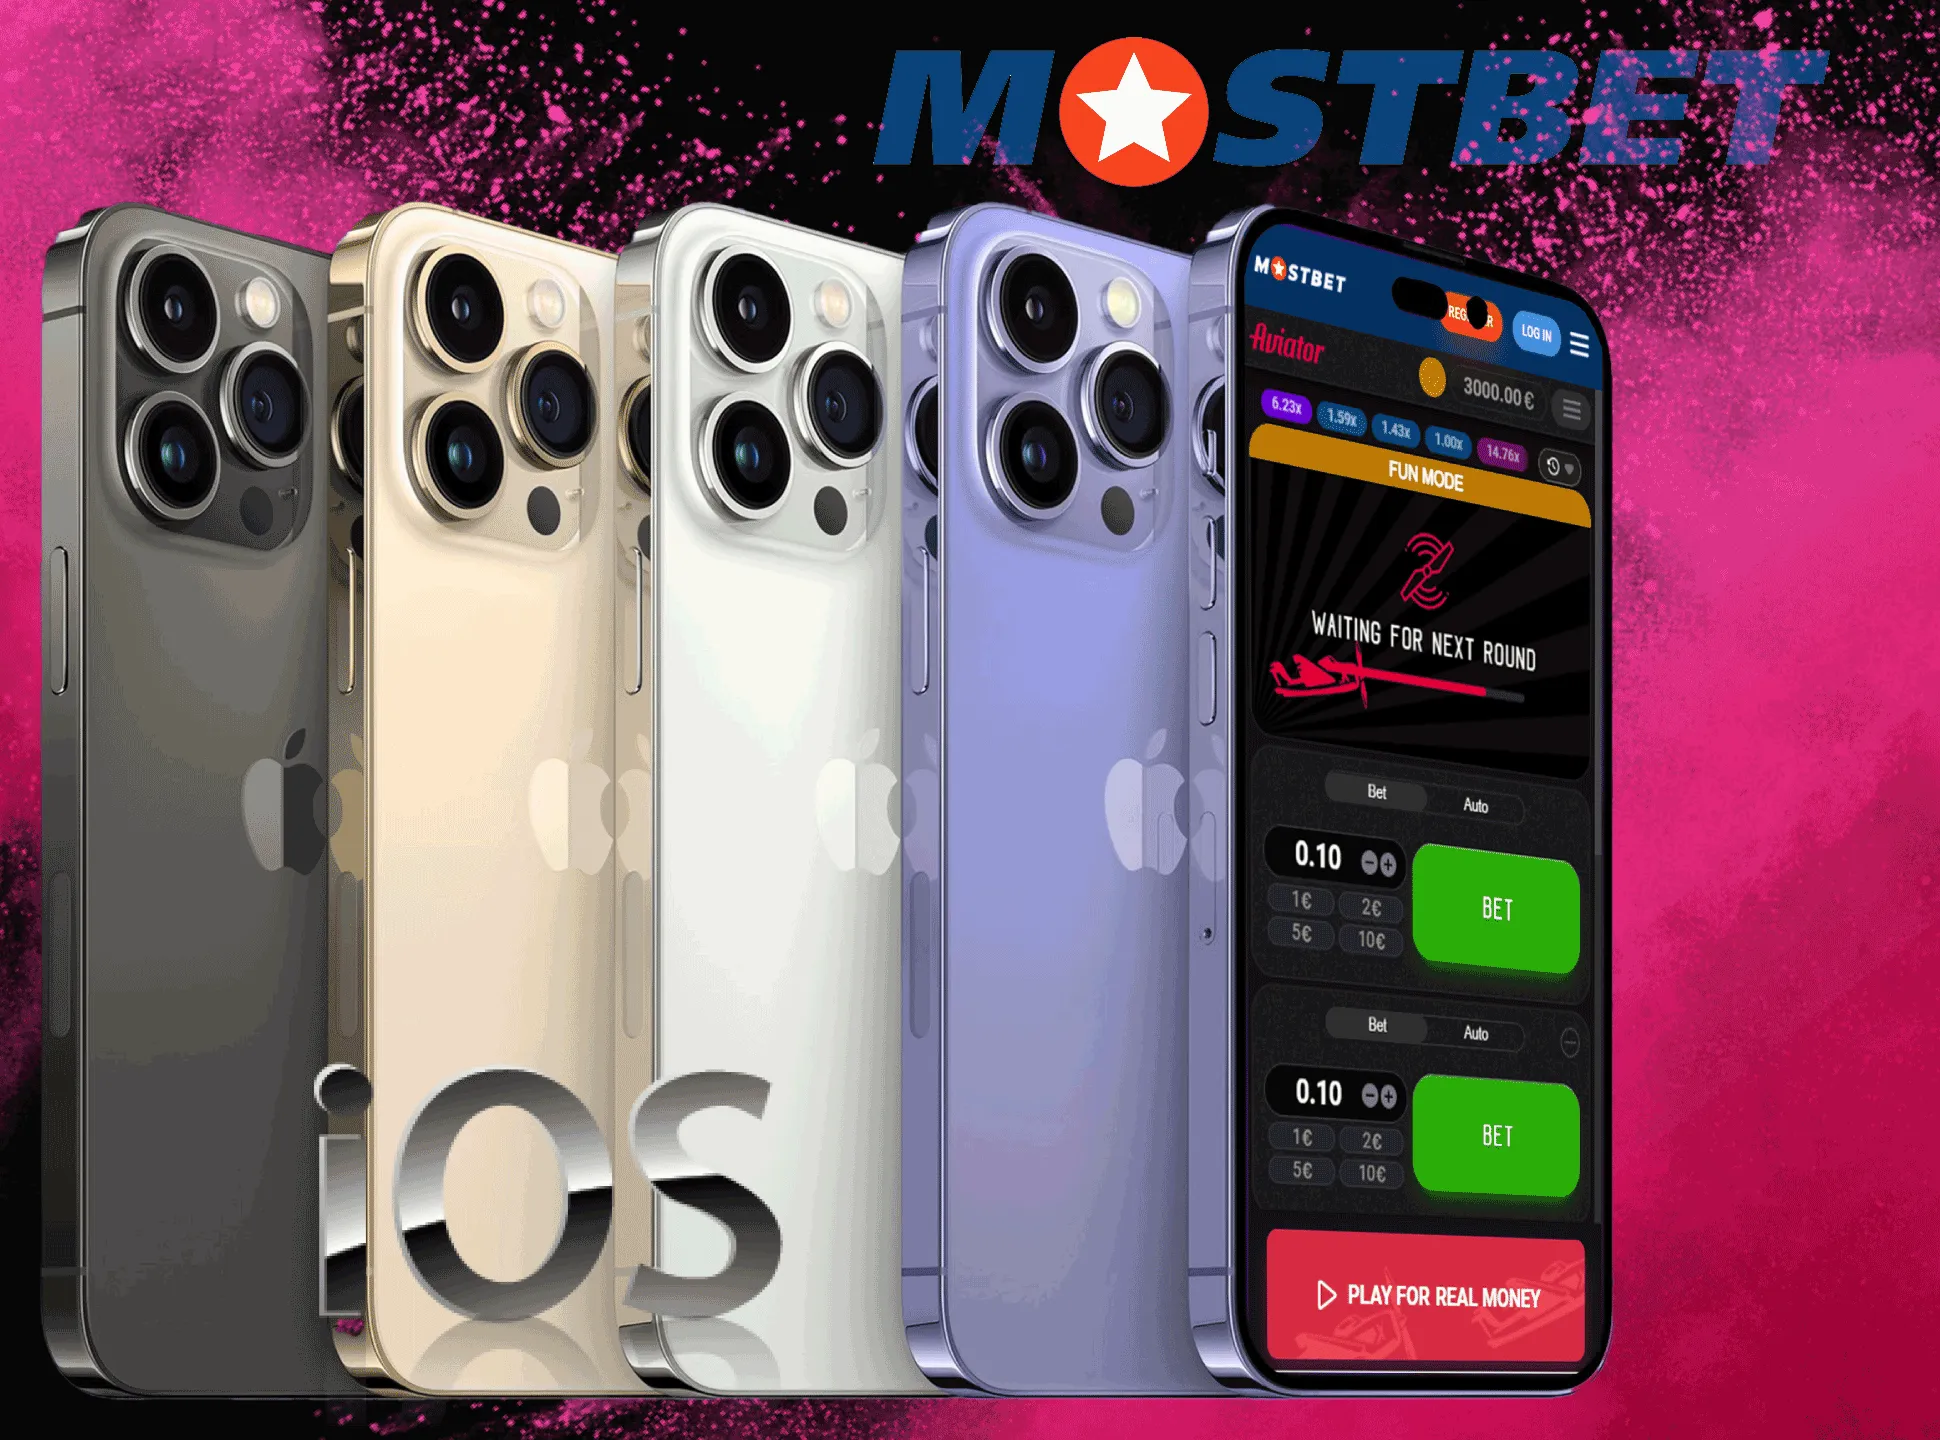 Mostbet also has an iOS app for iPhones and iPads.